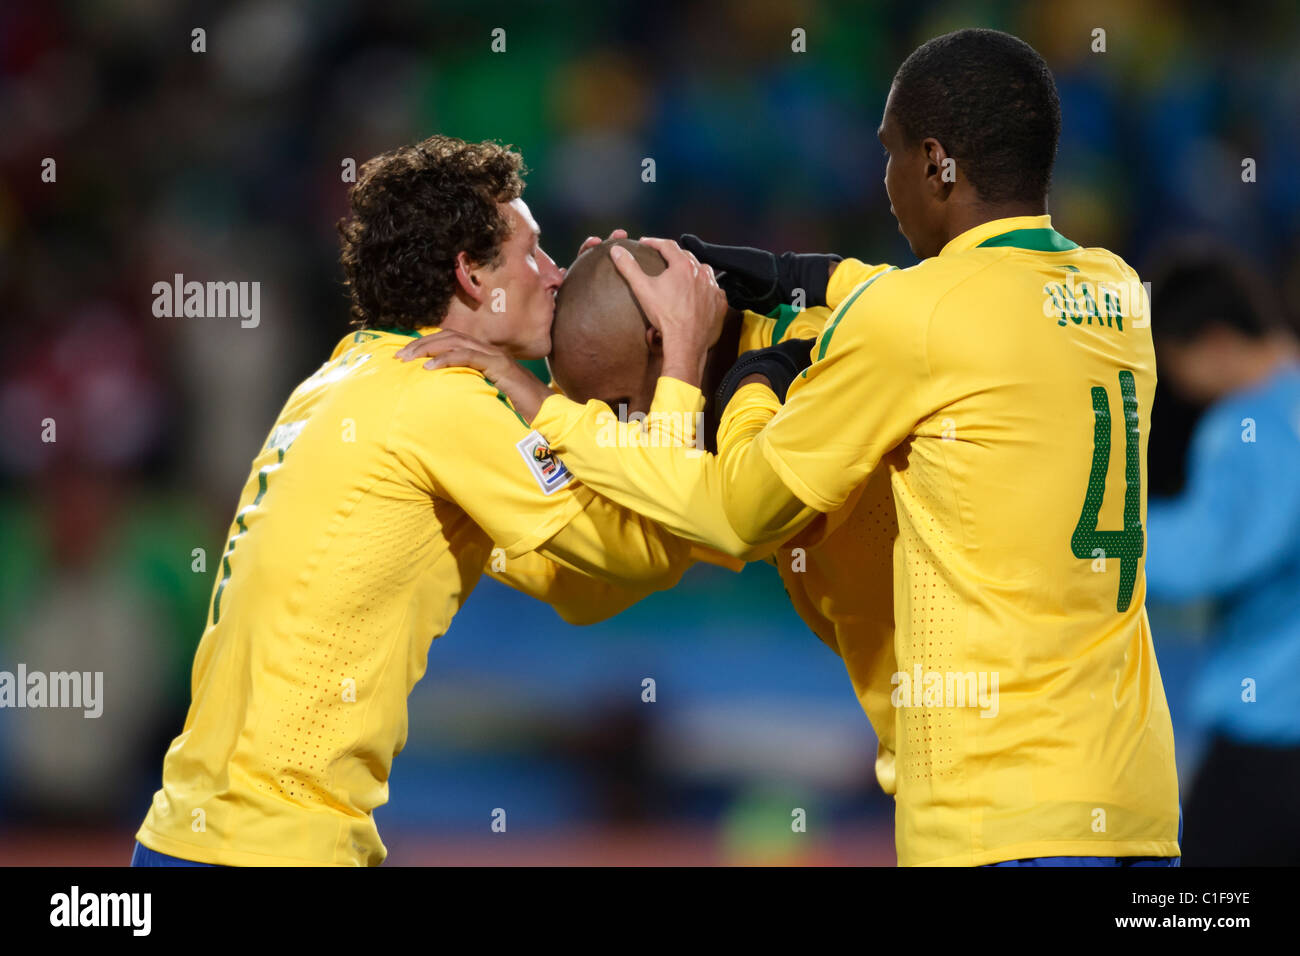 Elano of Brazil (l) kisses the head of Maicon (c) after Maicon scored a goal against North Korea during a 2010 World Cup match. Stock Photo